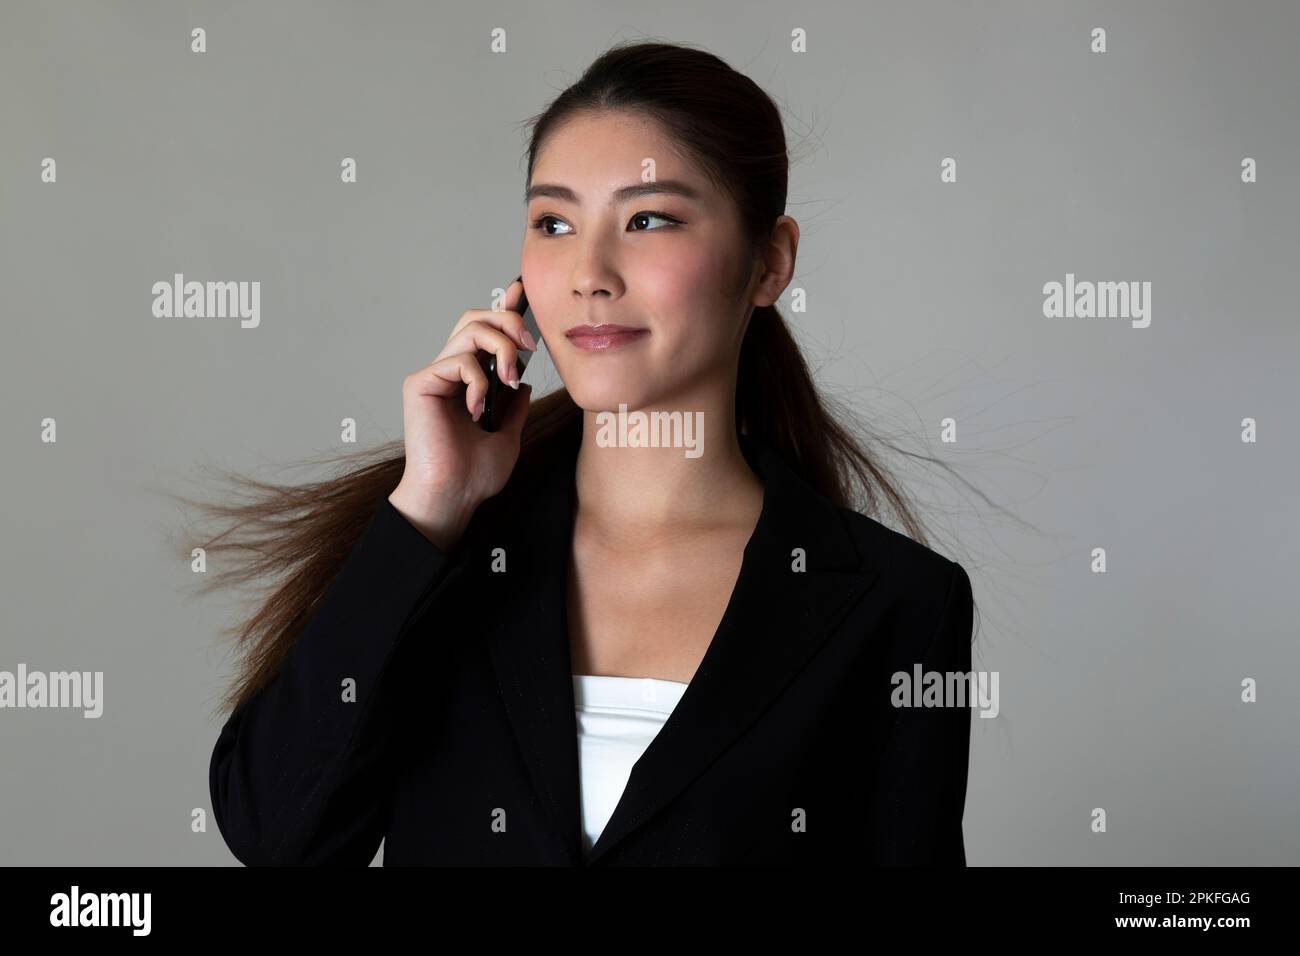 Portrait of Woman in Suit Stock Photo